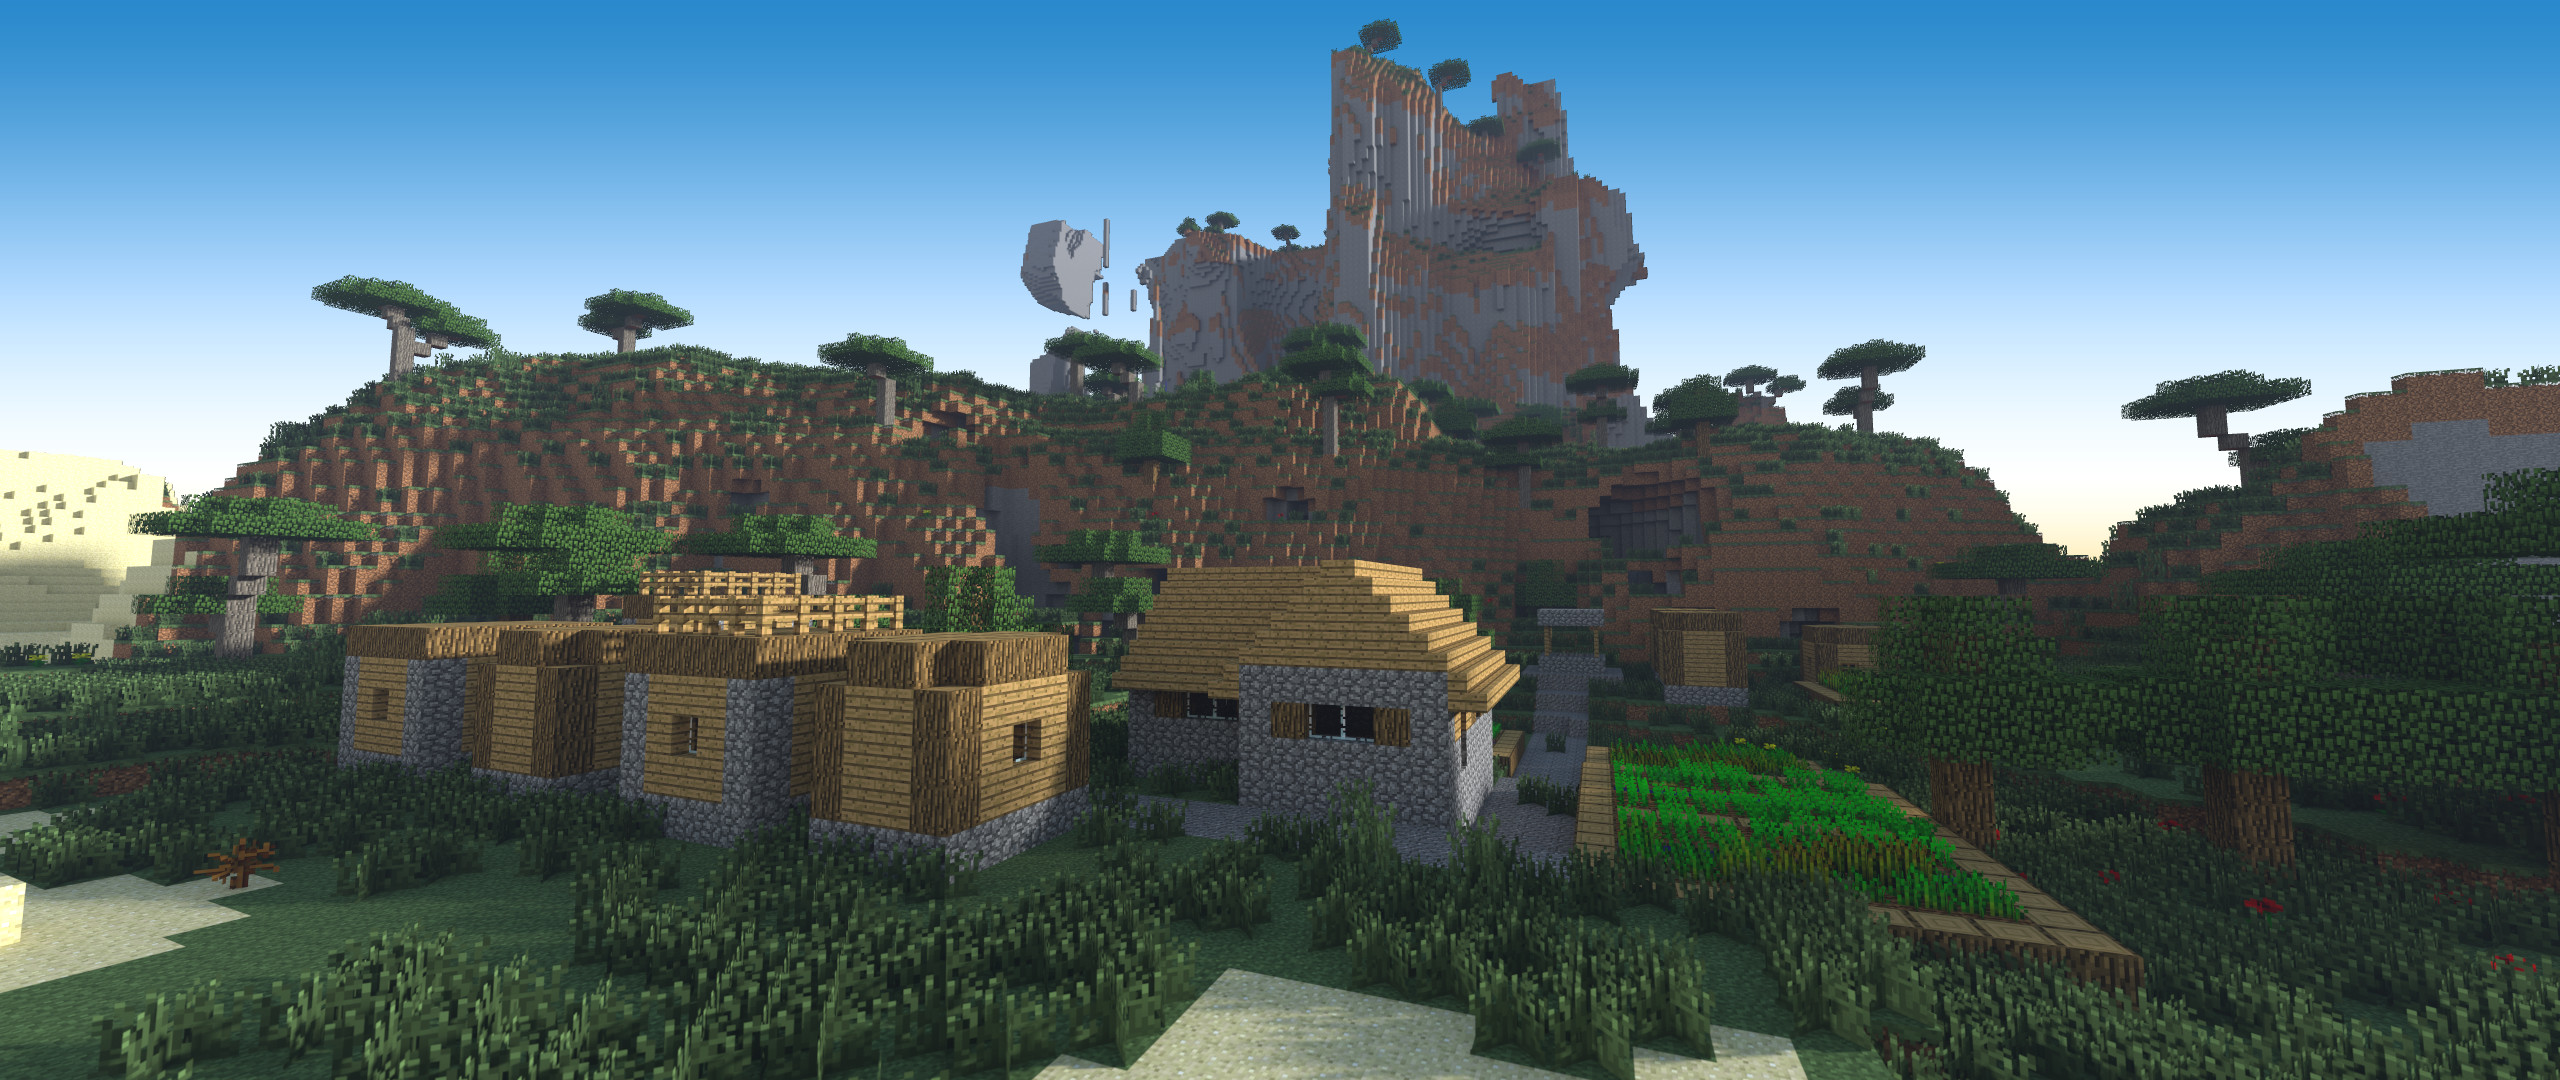 2560x1080 ... Minecraft Wallpapers New ...